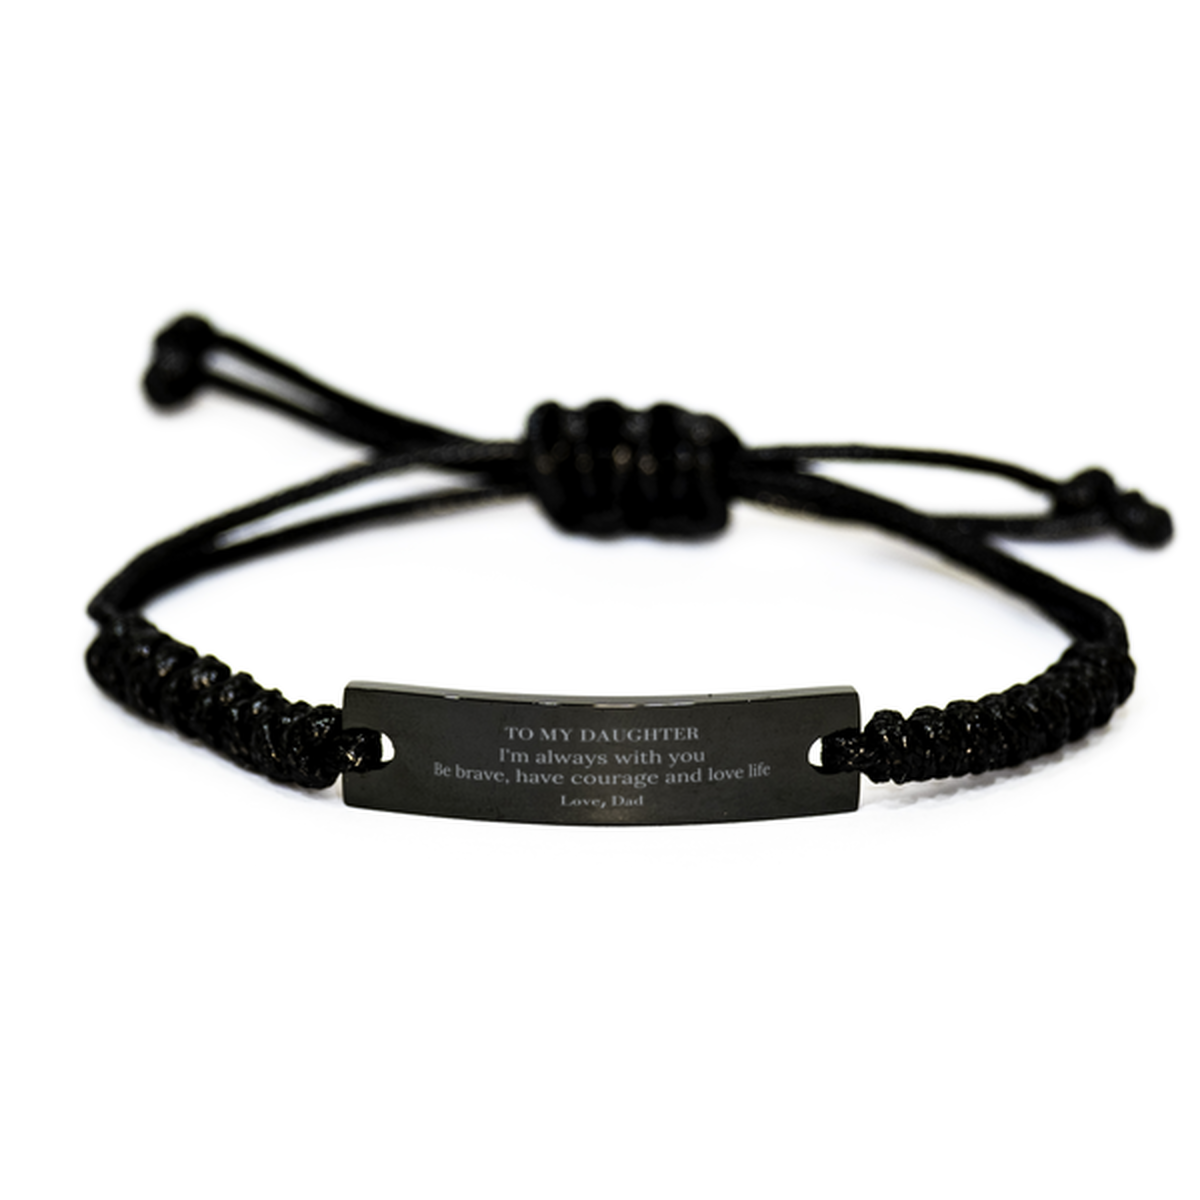 To My Daughter Gifts from Dad, Unique Black Rope Bracelet Inspirational Christmas Birthday Graduation Gifts for Daughter I'm always with you. Be brave, have courage and love life. Love, Dad